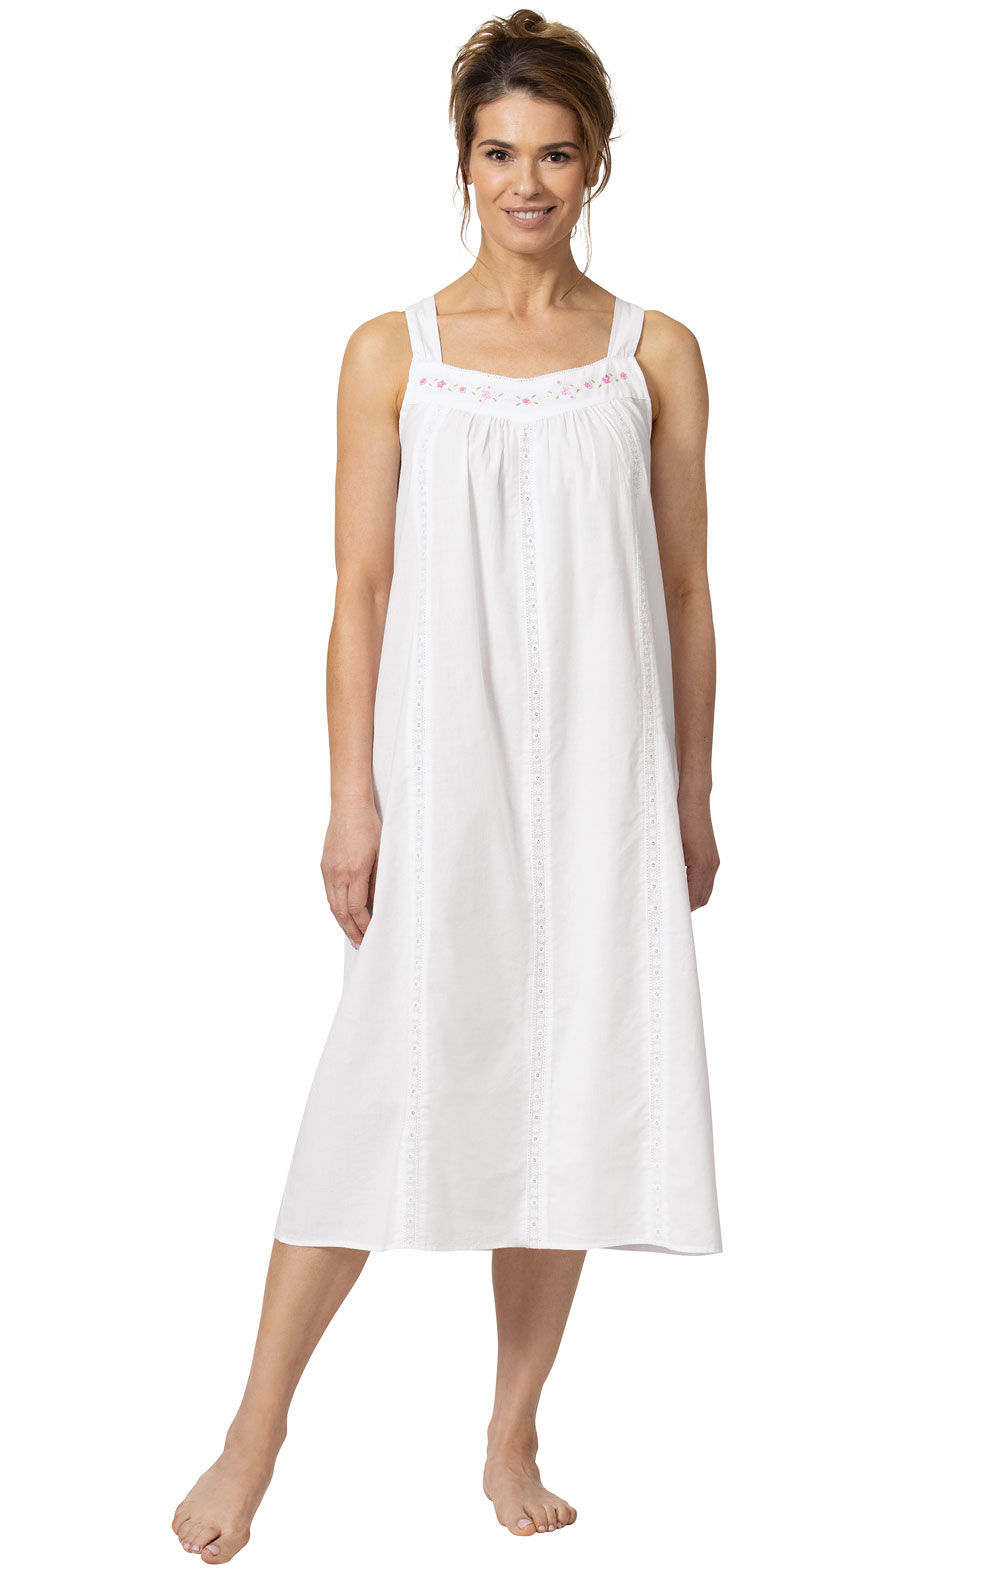 PajamaGram Nightgowns for Women Cotton Women Nightgown